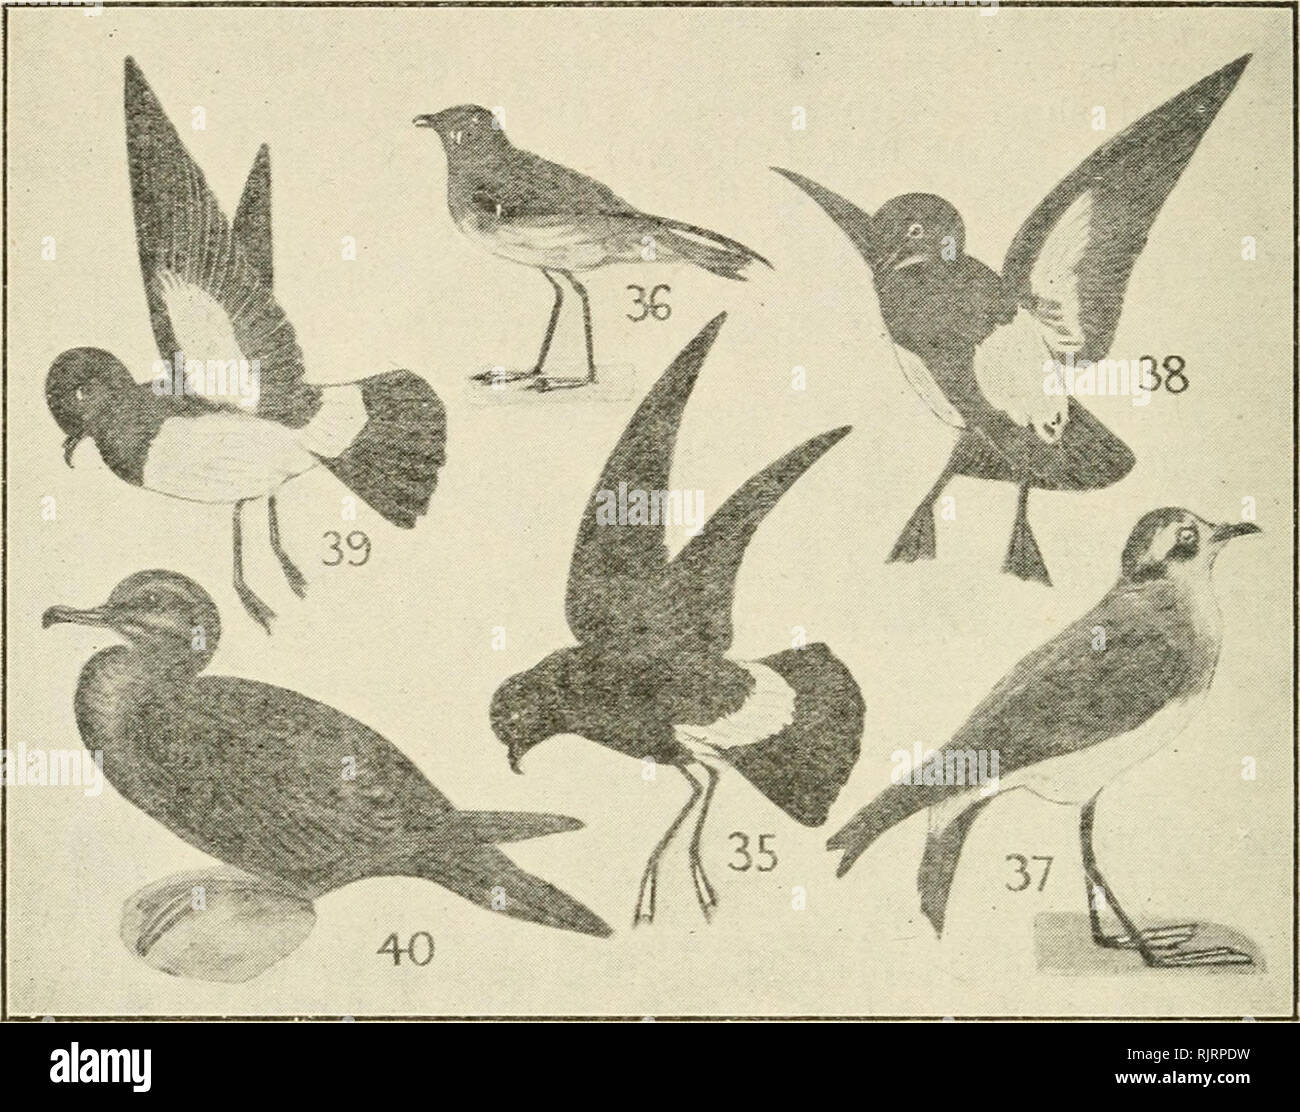 . An Australian bird book : a pocket book for field use. Birds -- Australia Identification. 26 AK AtrSTRALJAN BIRD BOOK.. ORDER VIII.-—PROCELLARIIFORMES, TUBINARES, TUBE-NOSED SWIMMERS. F. 27. PROCELLARIIDAE (5), STORM - PETRELS, MOTHER CAREY'S CHICKENS, 25 sp.—10(3)A., 2(0)0., 10(0)P., 7(0)E., 18(4)Nc., 13(3)N1. 2 35 Wilson Storm-Petrel (Yellow - webbed, Flat-clawed), 3 Oceanites oceanica, S. Polar regions N. to British Is. (ace), Labrador (ace), India, A., N.Z. c. ocean Blackish; base tail above below white; legs black; webs yellow; f., sim. Shellfish, small fish, greasy. During the interest Stock Photo